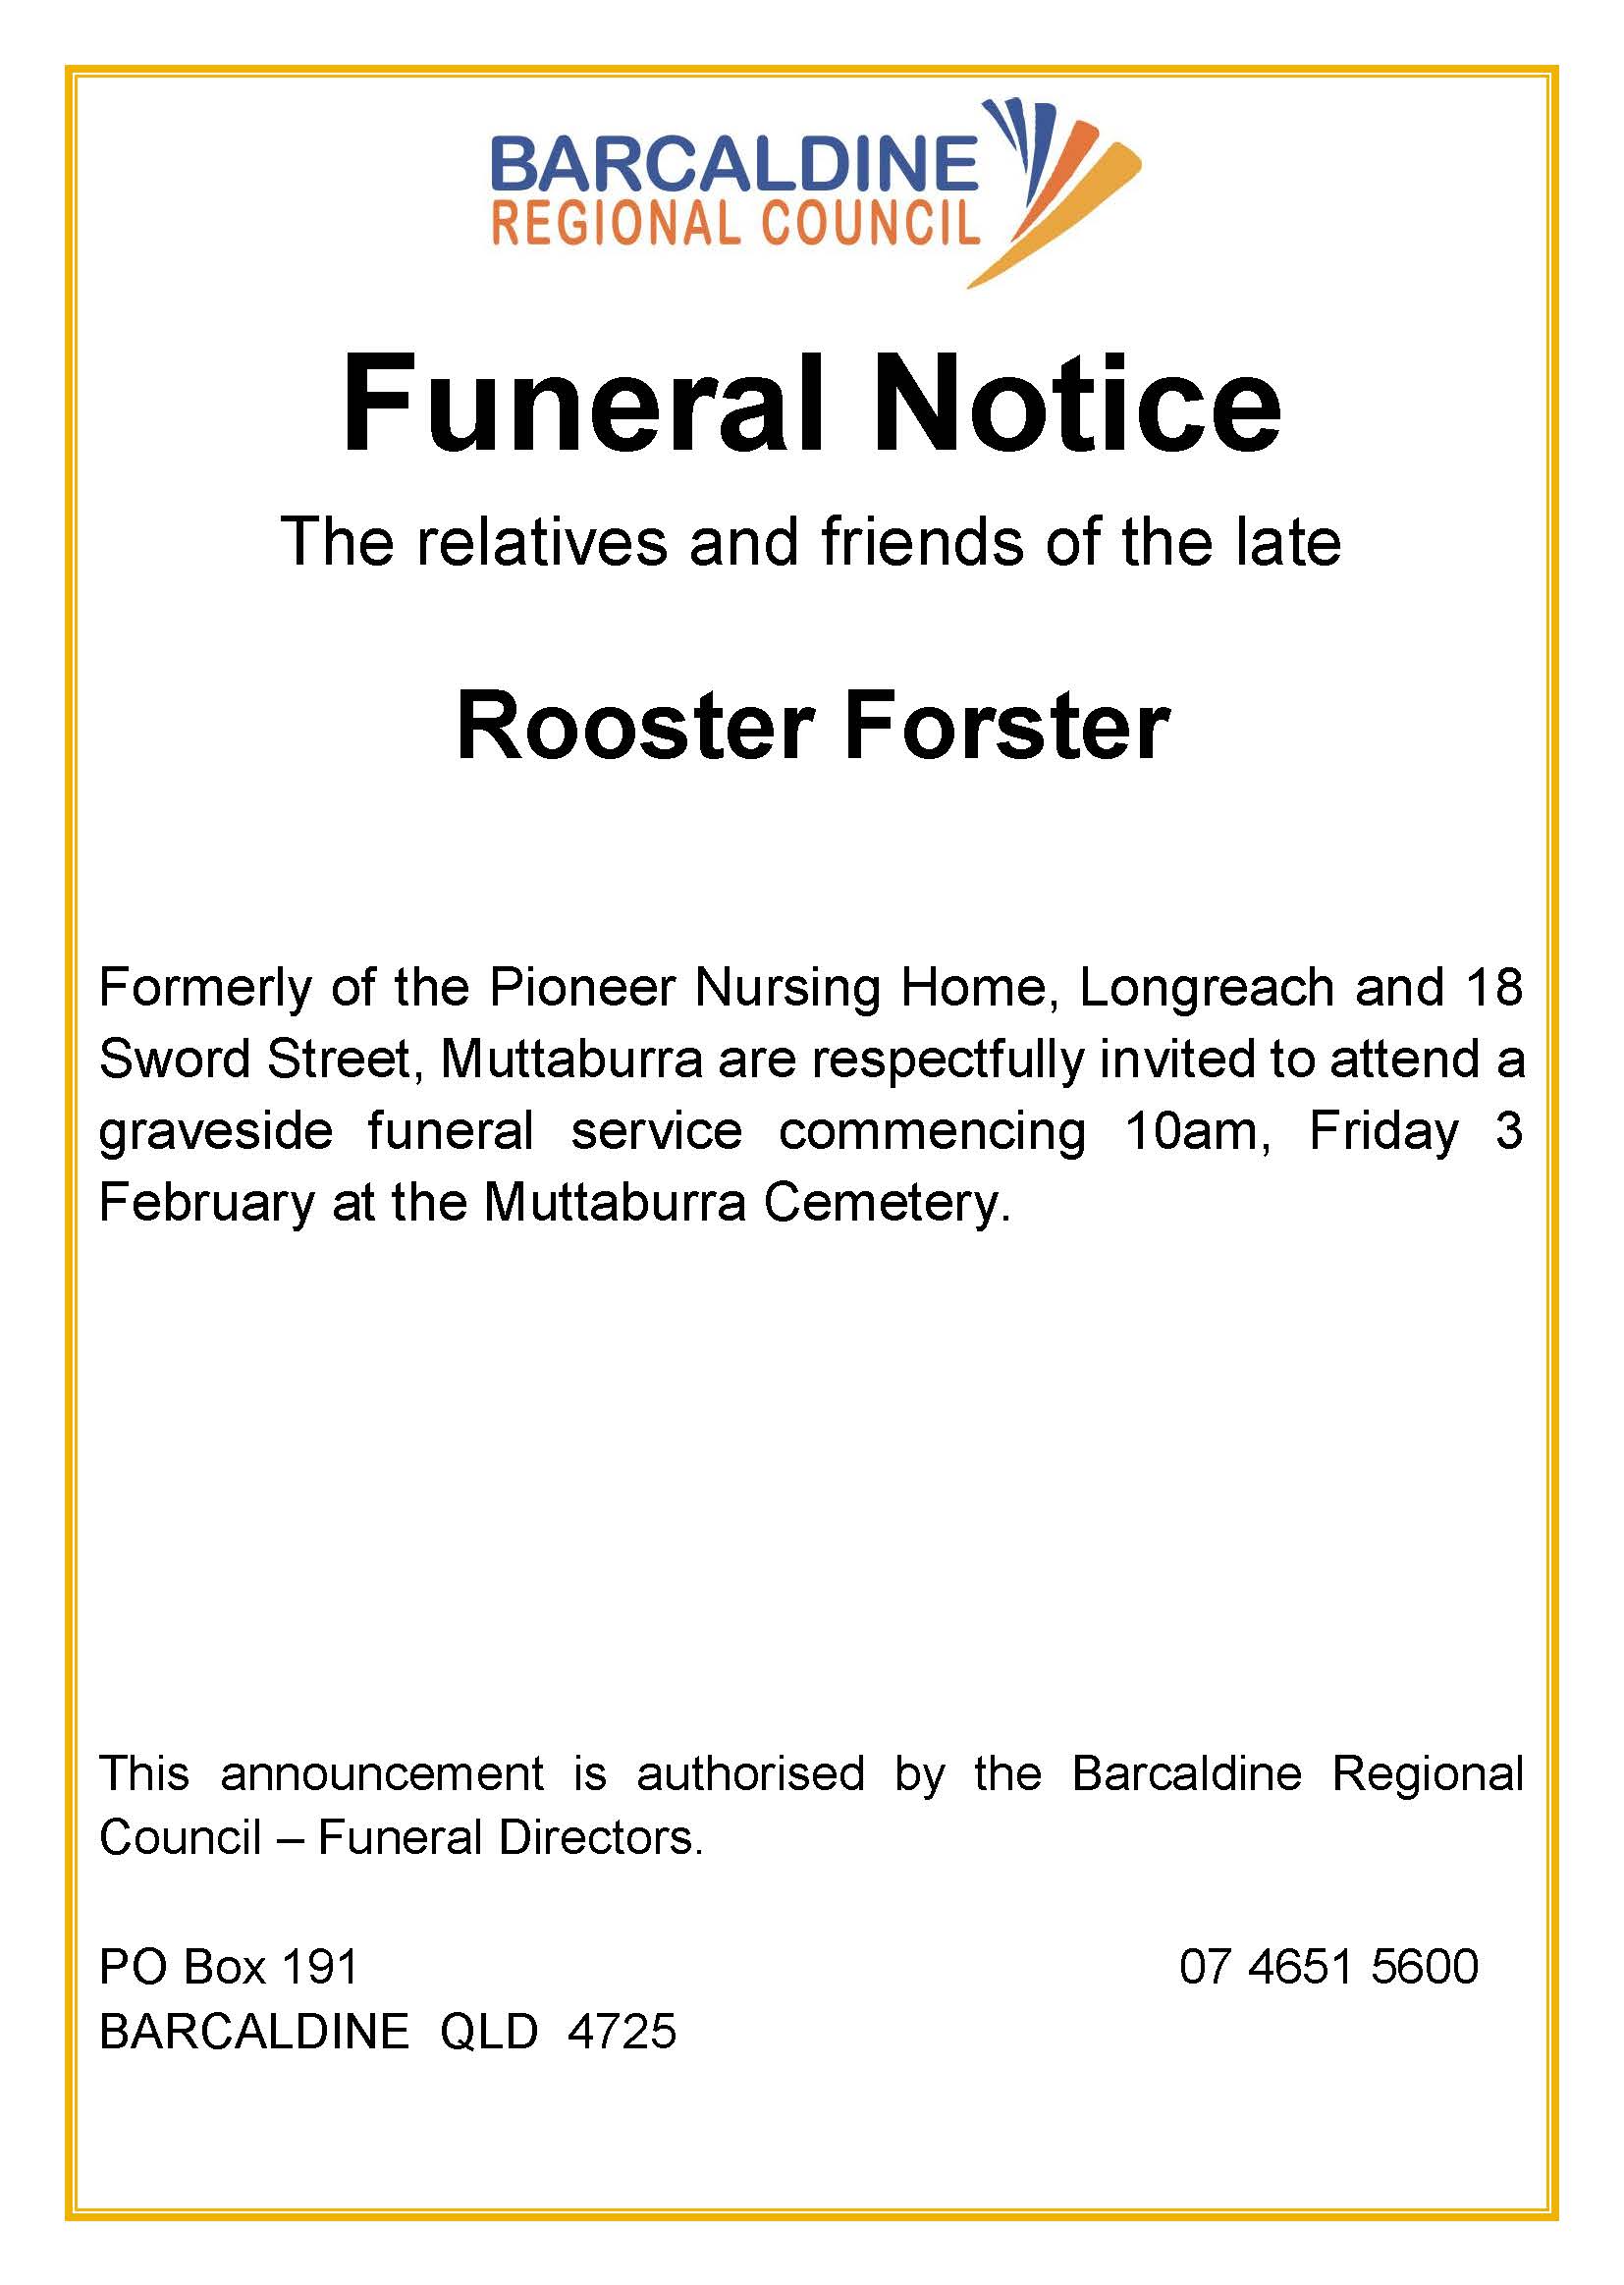 Rooster Forster Funeral Notice